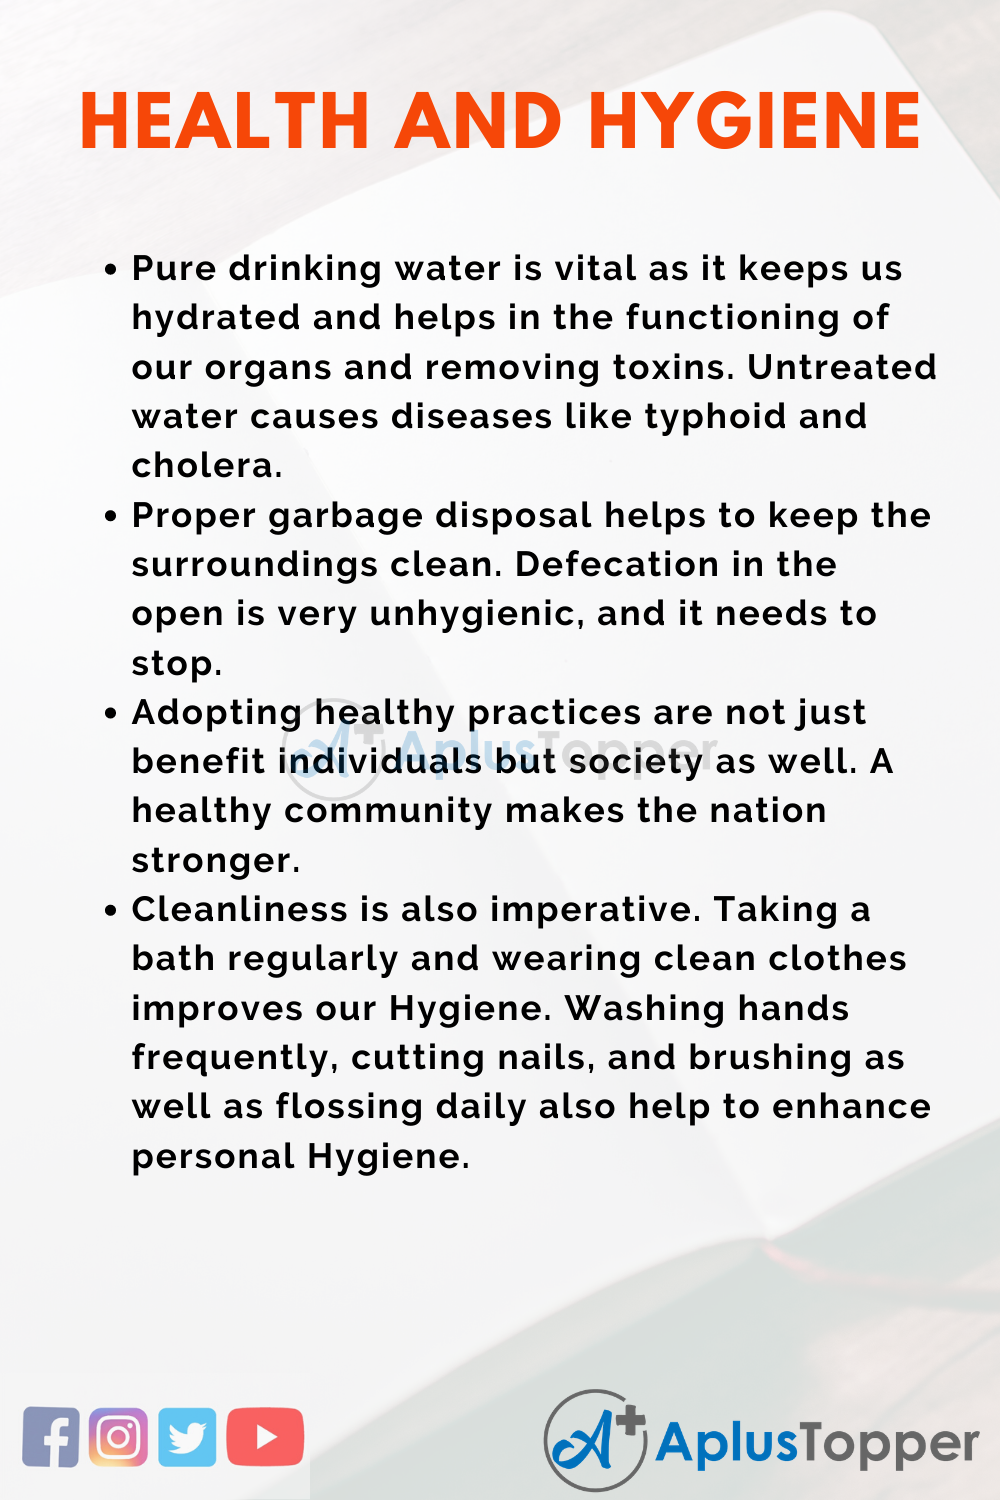 speech on importance of health and hygiene